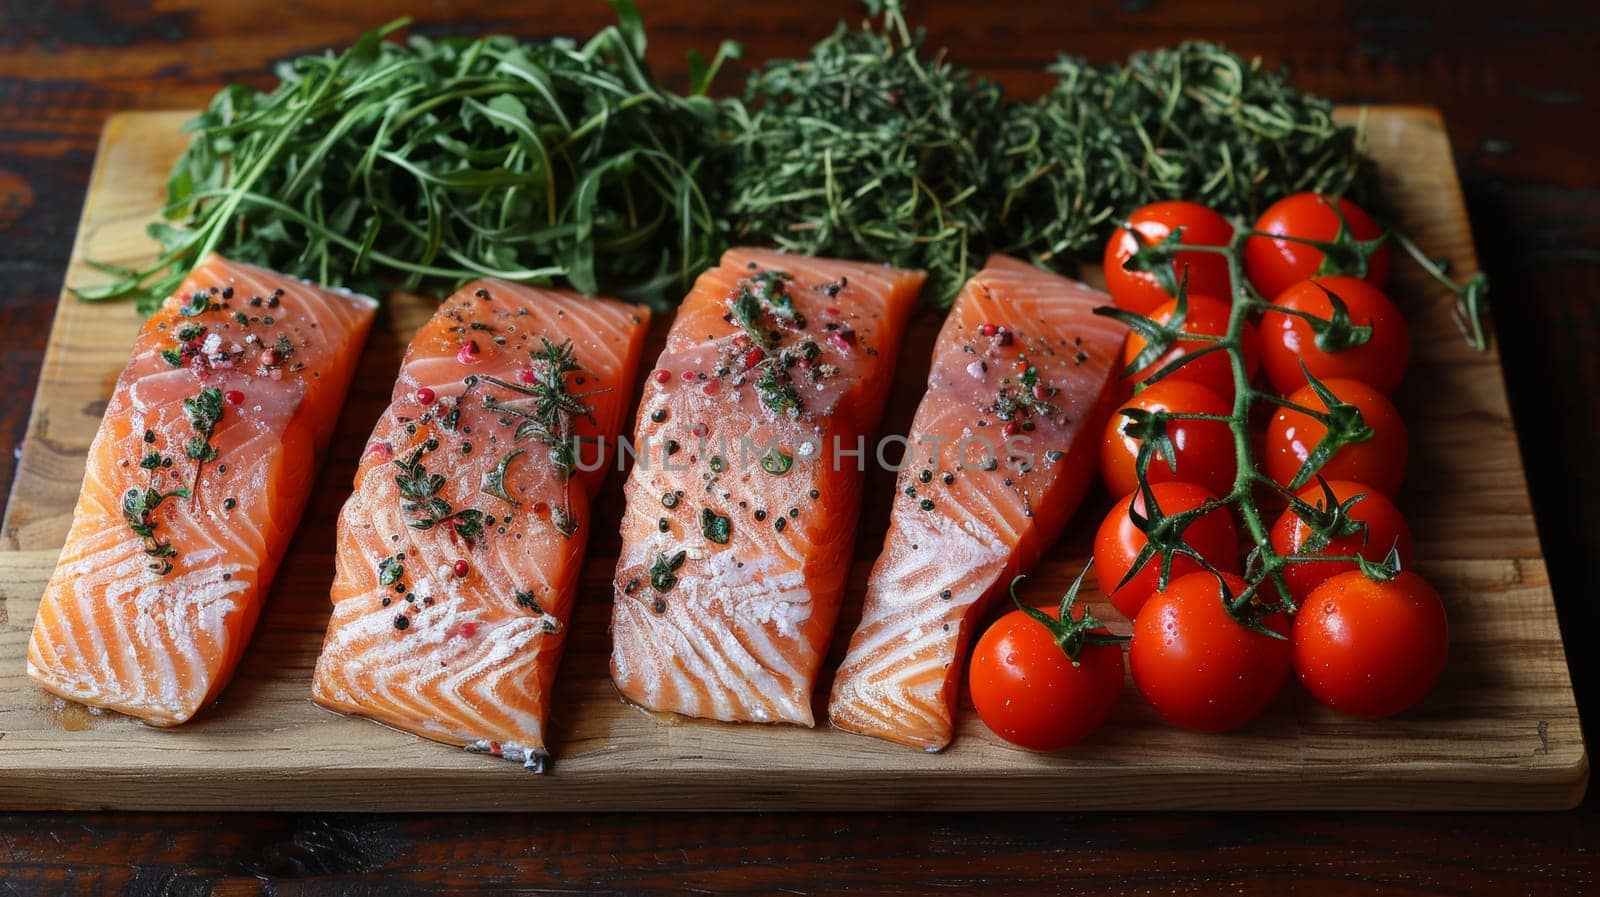 A wooden cutting board with salmon, tomatoes and herbs on it